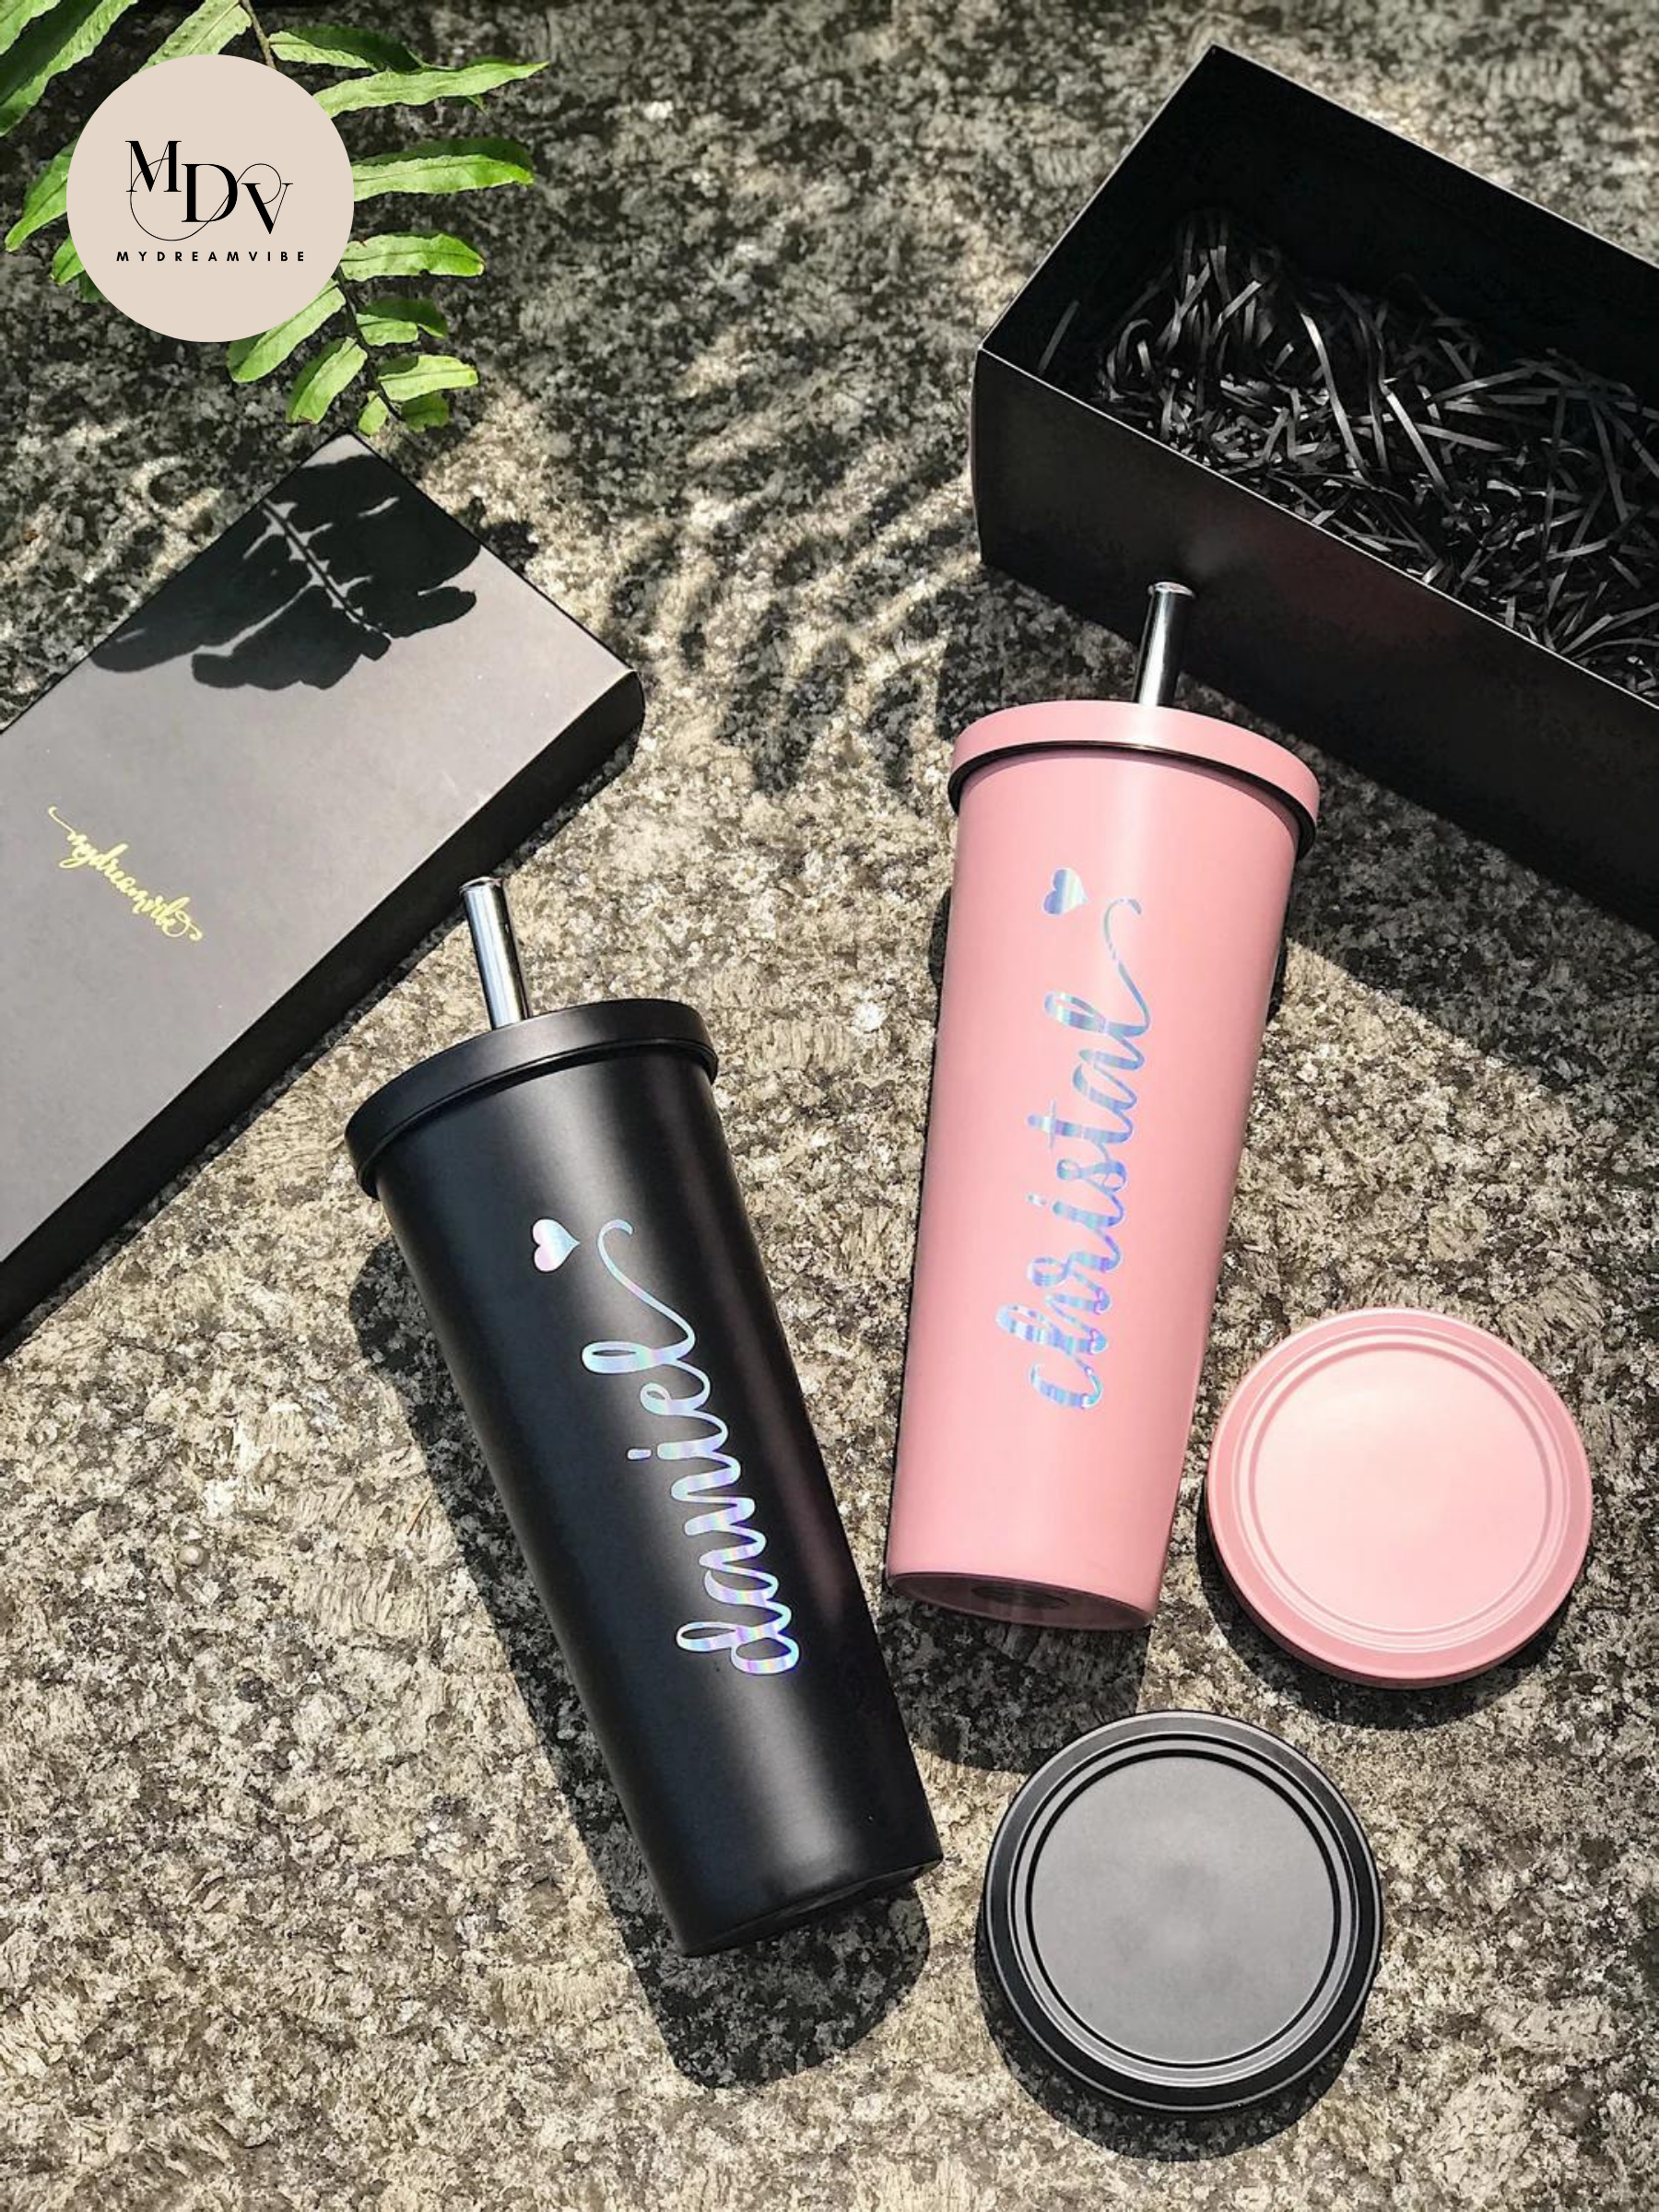 750ml Double Wall Stainless Steel Bubble Tea Tumbler with Straw and Covered Lid - BLACK / PINK / BLUE-MyDreamVibe.Co